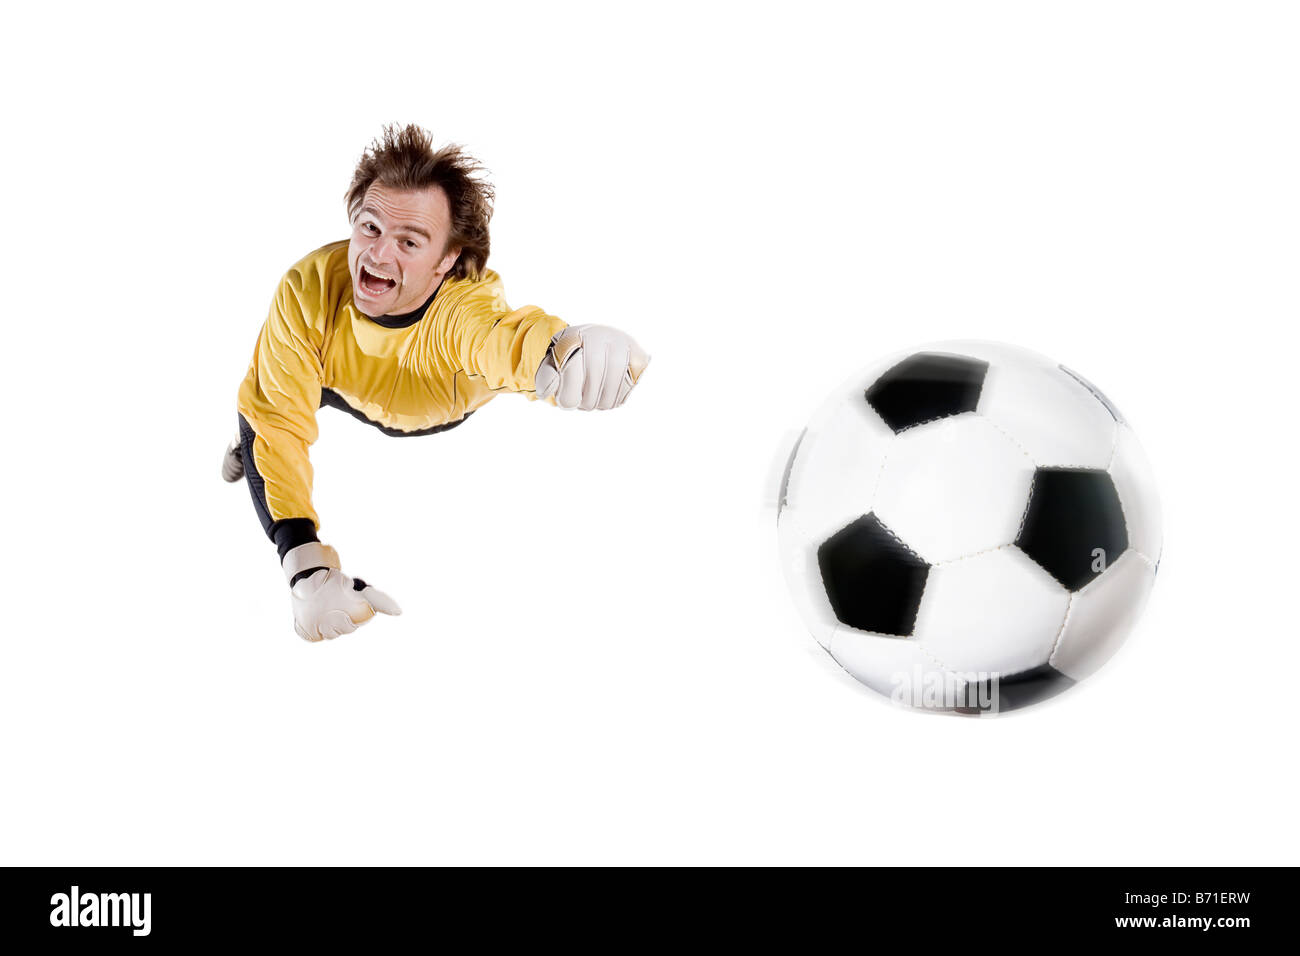 Young goalkeeper in action Full isolated studio picture Stock Photo